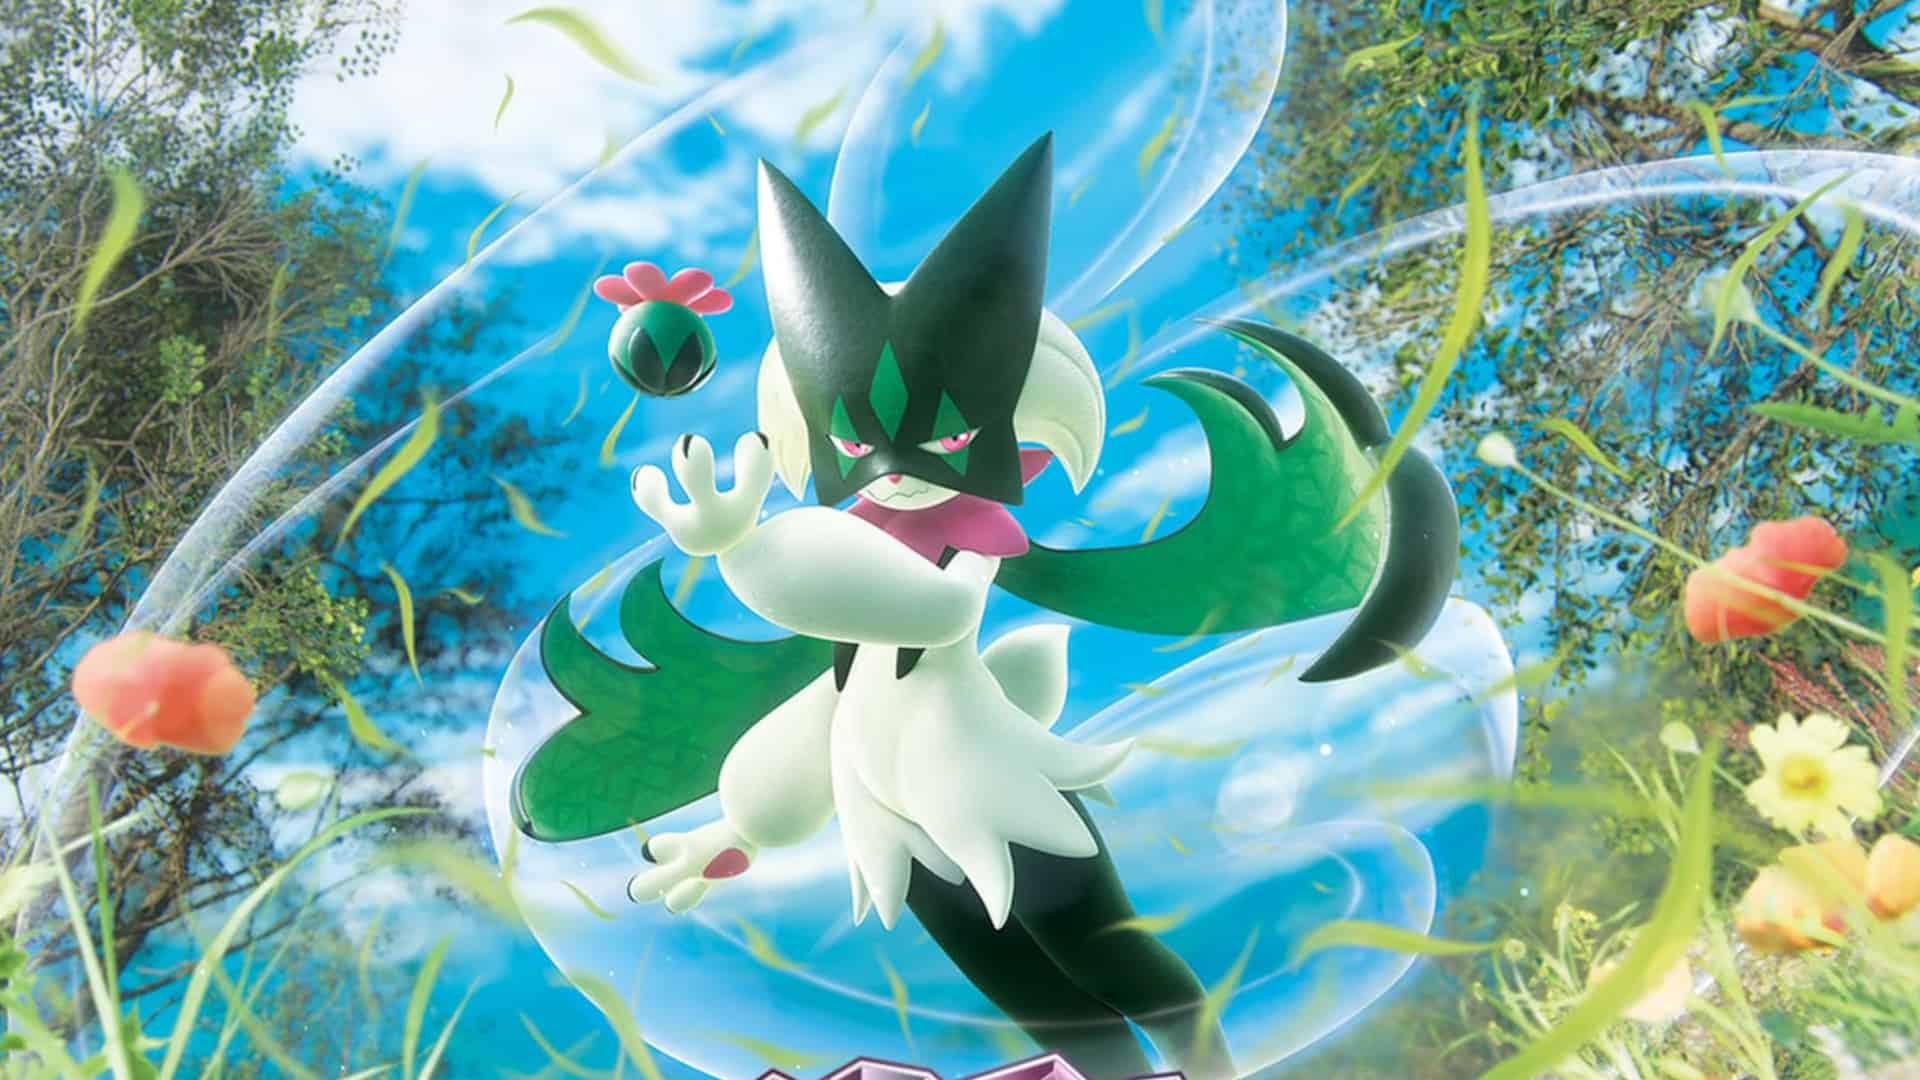 An image of a pokemon character in a field, showcasing the Pokemon TCG Gym Leader Challenge.